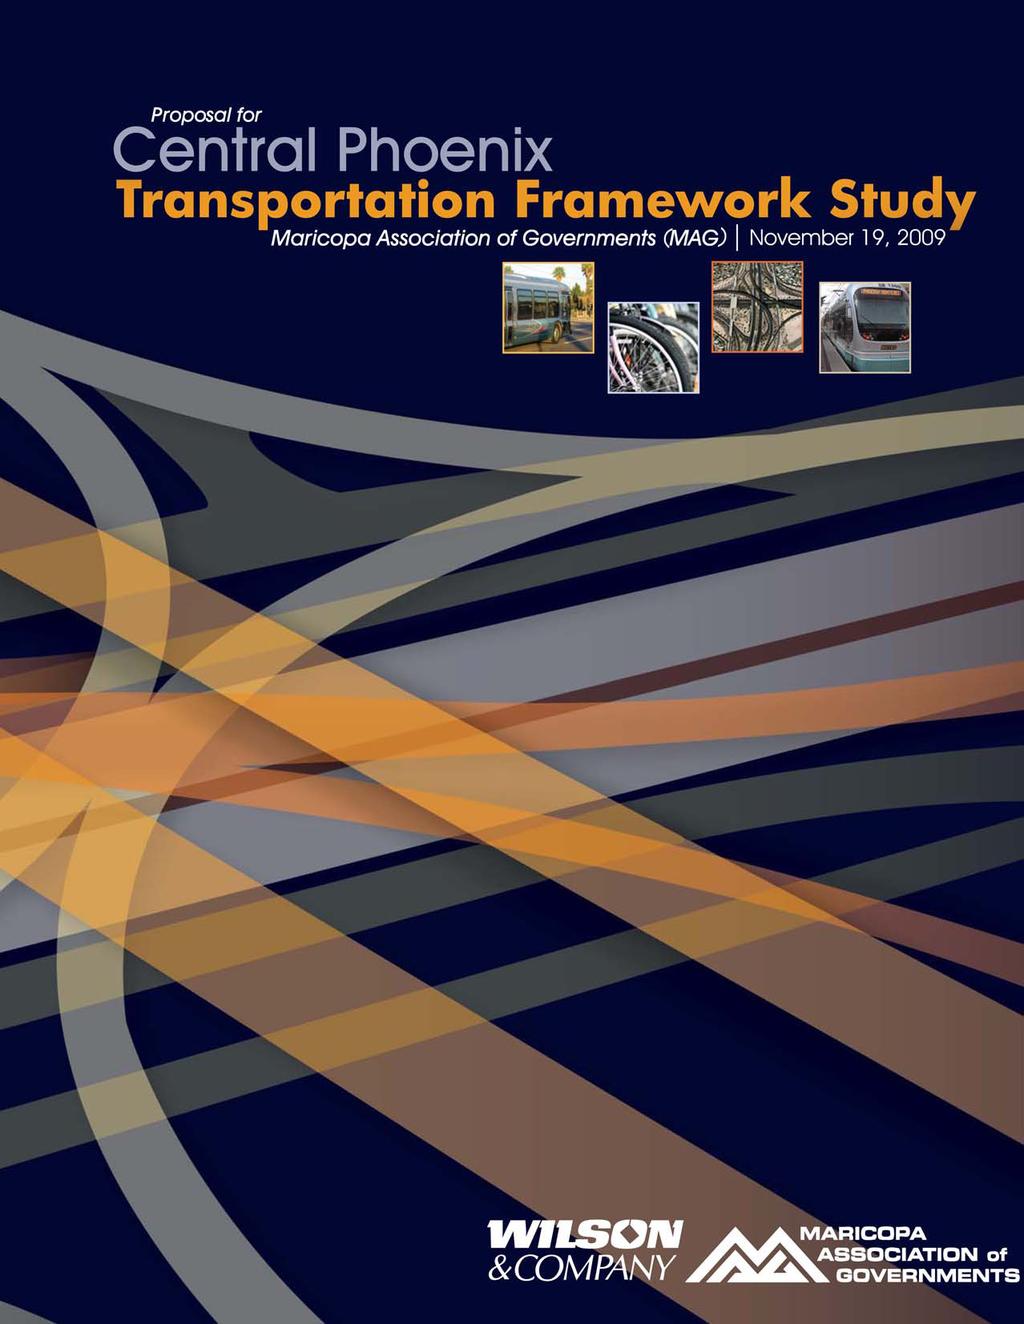 PHX C DRAFT TECHNICAL MEMORANDUM: DIVERGING DIAMOND INTERCHANGES Note: This document presents a planning level assessment of the feasibility of various improvement strategies for